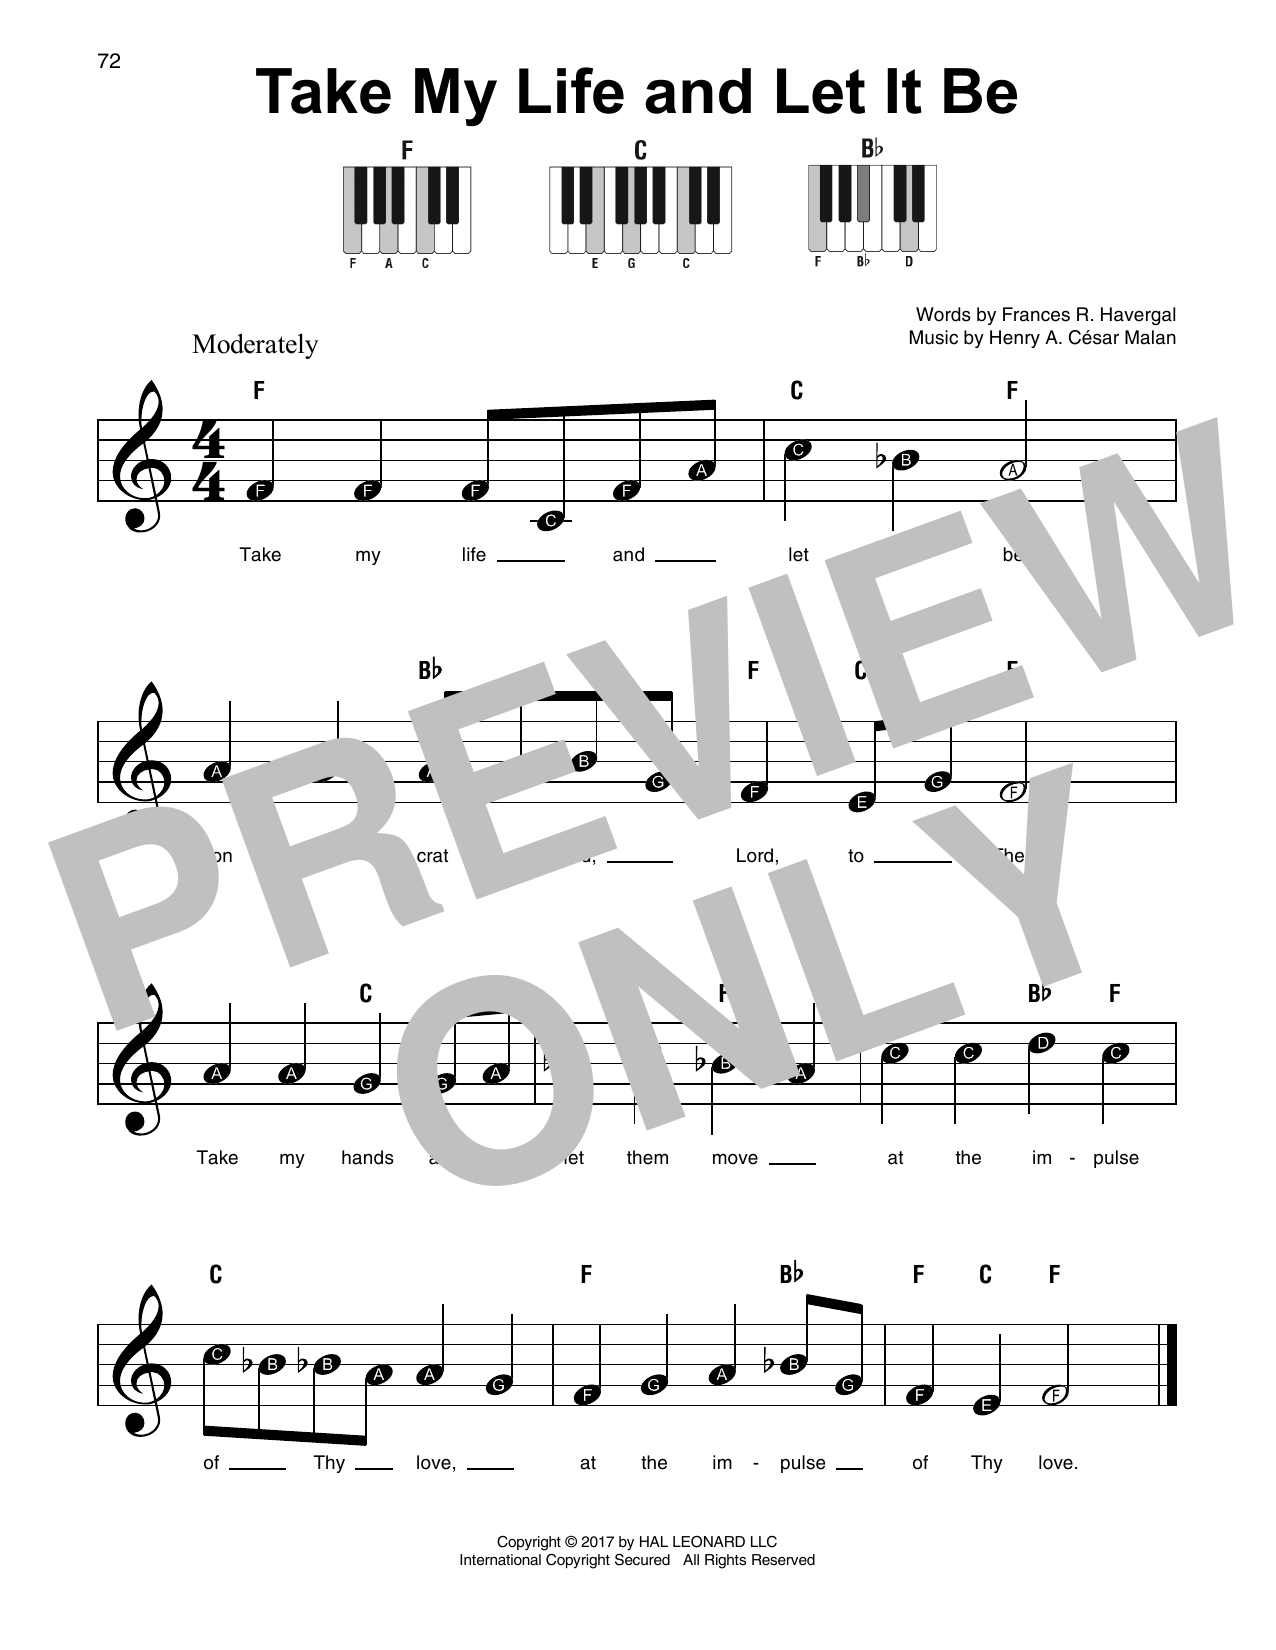 Download Henry A. Cesar Malan Take My Life And Let It Be Sheet Music